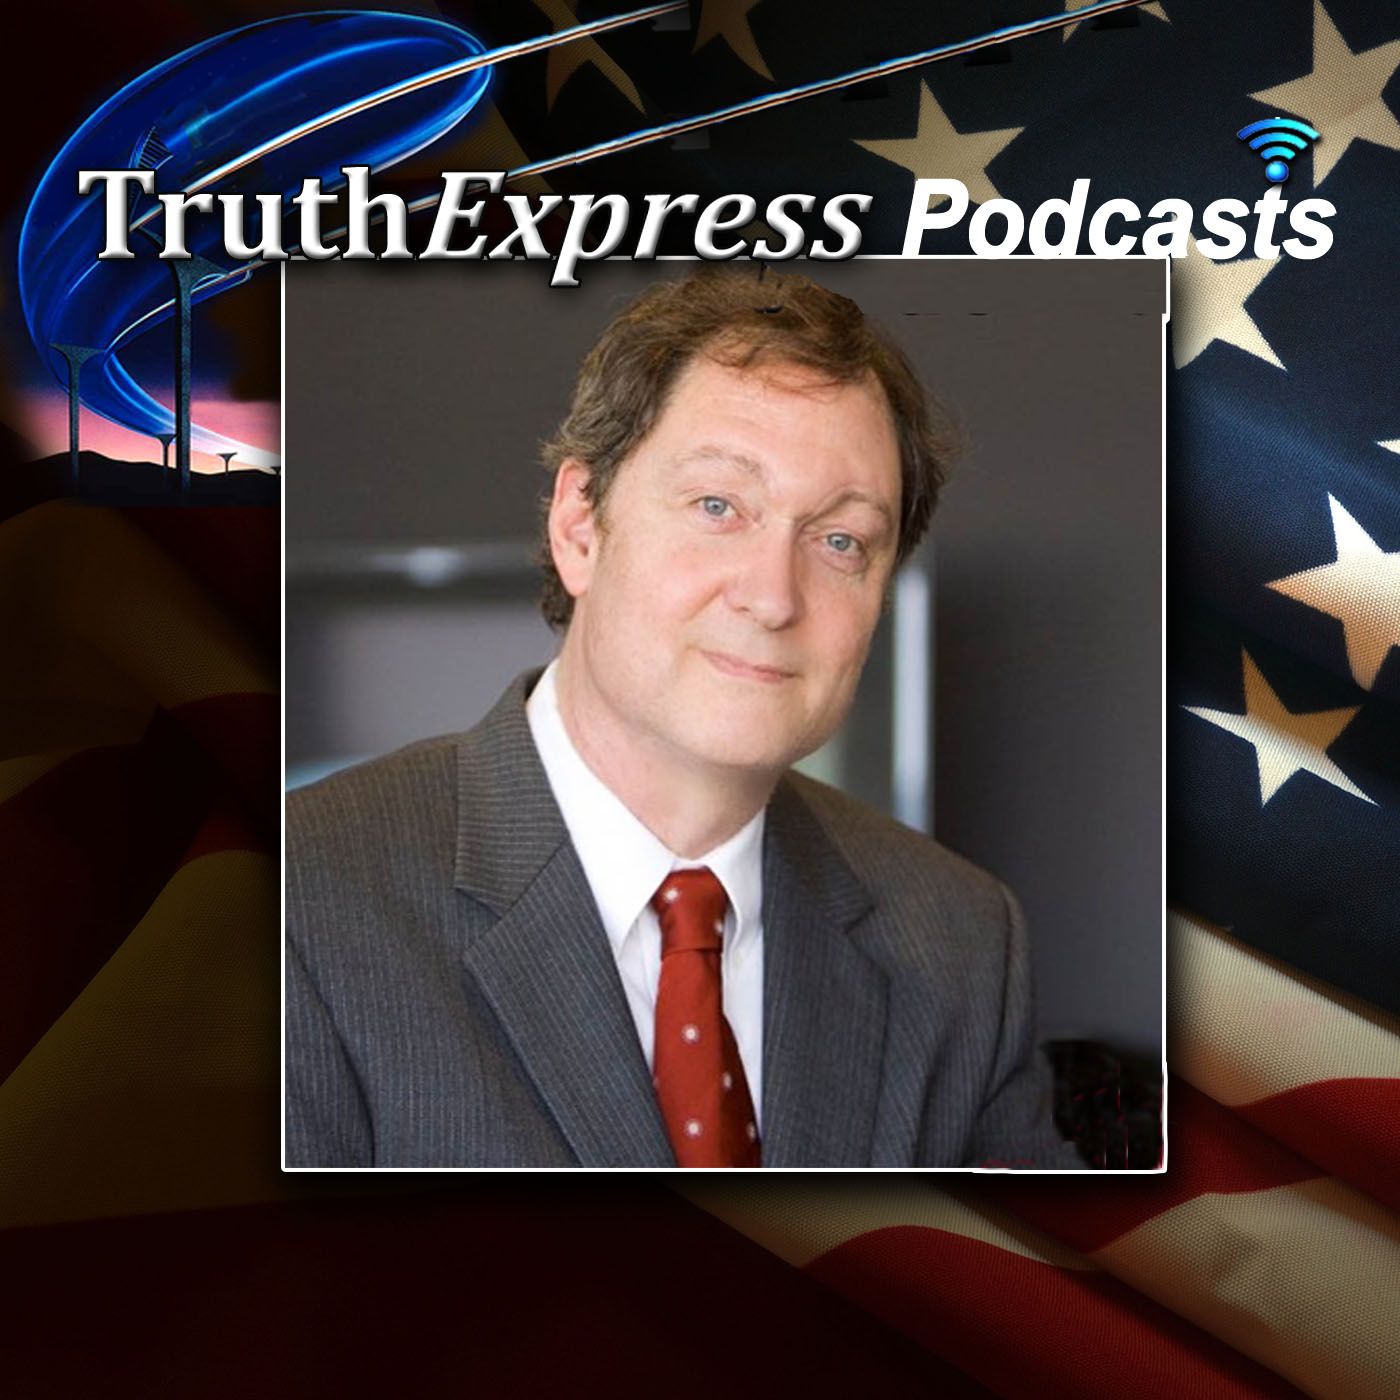 John Lott - ALL NEW: Politicians, the Media, and botched “Studies” have twisted the facts (ep #9-2-23)